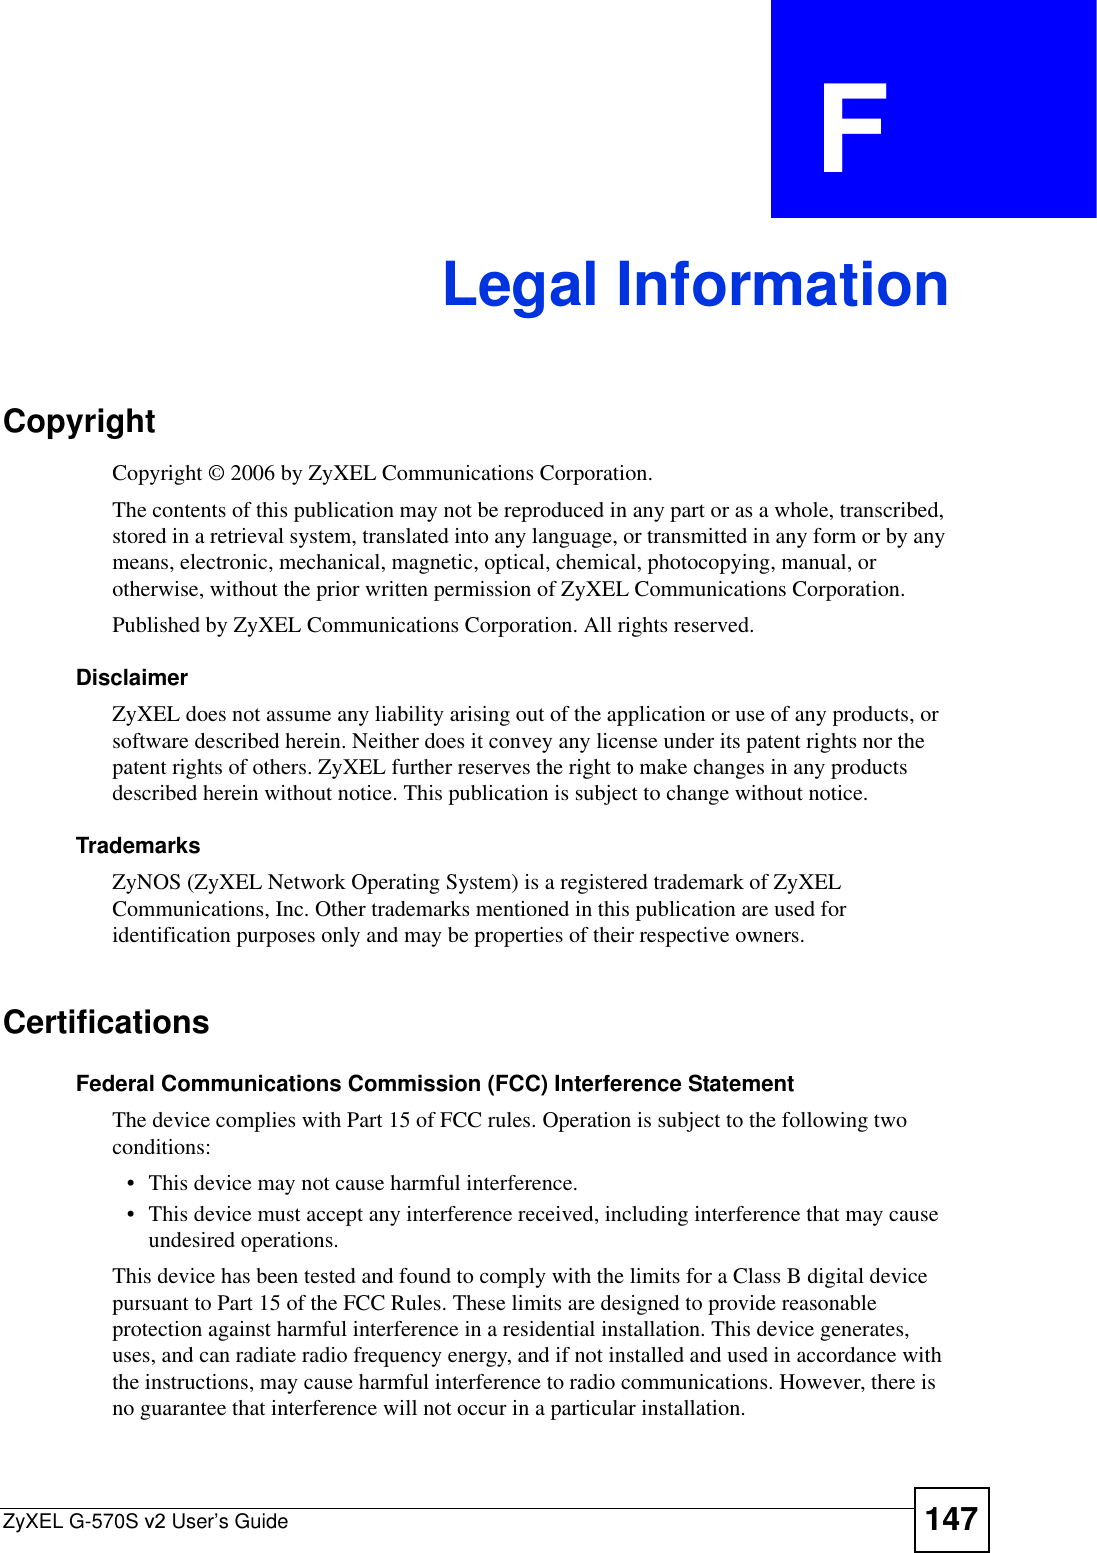 ZyXEL G-570S v2 User’s Guide 147APPENDIX  F Legal InformationCopyrightCopyright © 2006 by ZyXEL Communications Corporation.The contents of this publication may not be reproduced in any part or as a whole, transcribed, stored in a retrieval system, translated into any language, or transmitted in any form or by any means, electronic, mechanical, magnetic, optical, chemical, photocopying, manual, or otherwise, without the prior written permission of ZyXEL Communications Corporation.Published by ZyXEL Communications Corporation. All rights reserved.DisclaimerZyXEL does not assume any liability arising out of the application or use of any products, or software described herein. Neither does it convey any license under its patent rights nor the patent rights of others. ZyXEL further reserves the right to make changes in any products described herein without notice. This publication is subject to change without notice.TrademarksZyNOS (ZyXEL Network Operating System) is a registered trademark of ZyXEL Communications, Inc. Other trademarks mentioned in this publication are used for identification purposes only and may be properties of their respective owners.CertificationsFederal Communications Commission (FCC) Interference StatementThe device complies with Part 15 of FCC rules. Operation is subject to the following two conditions:• This device may not cause harmful interference.• This device must accept any interference received, including interference that may cause undesired operations.This device has been tested and found to comply with the limits for a Class B digital device pursuant to Part 15 of the FCC Rules. These limits are designed to provide reasonable protection against harmful interference in a residential installation. This device generates, uses, and can radiate radio frequency energy, and if not installed and used in accordance with the instructions, may cause harmful interference to radio communications. However, there is no guarantee that interference will not occur in a particular installation.